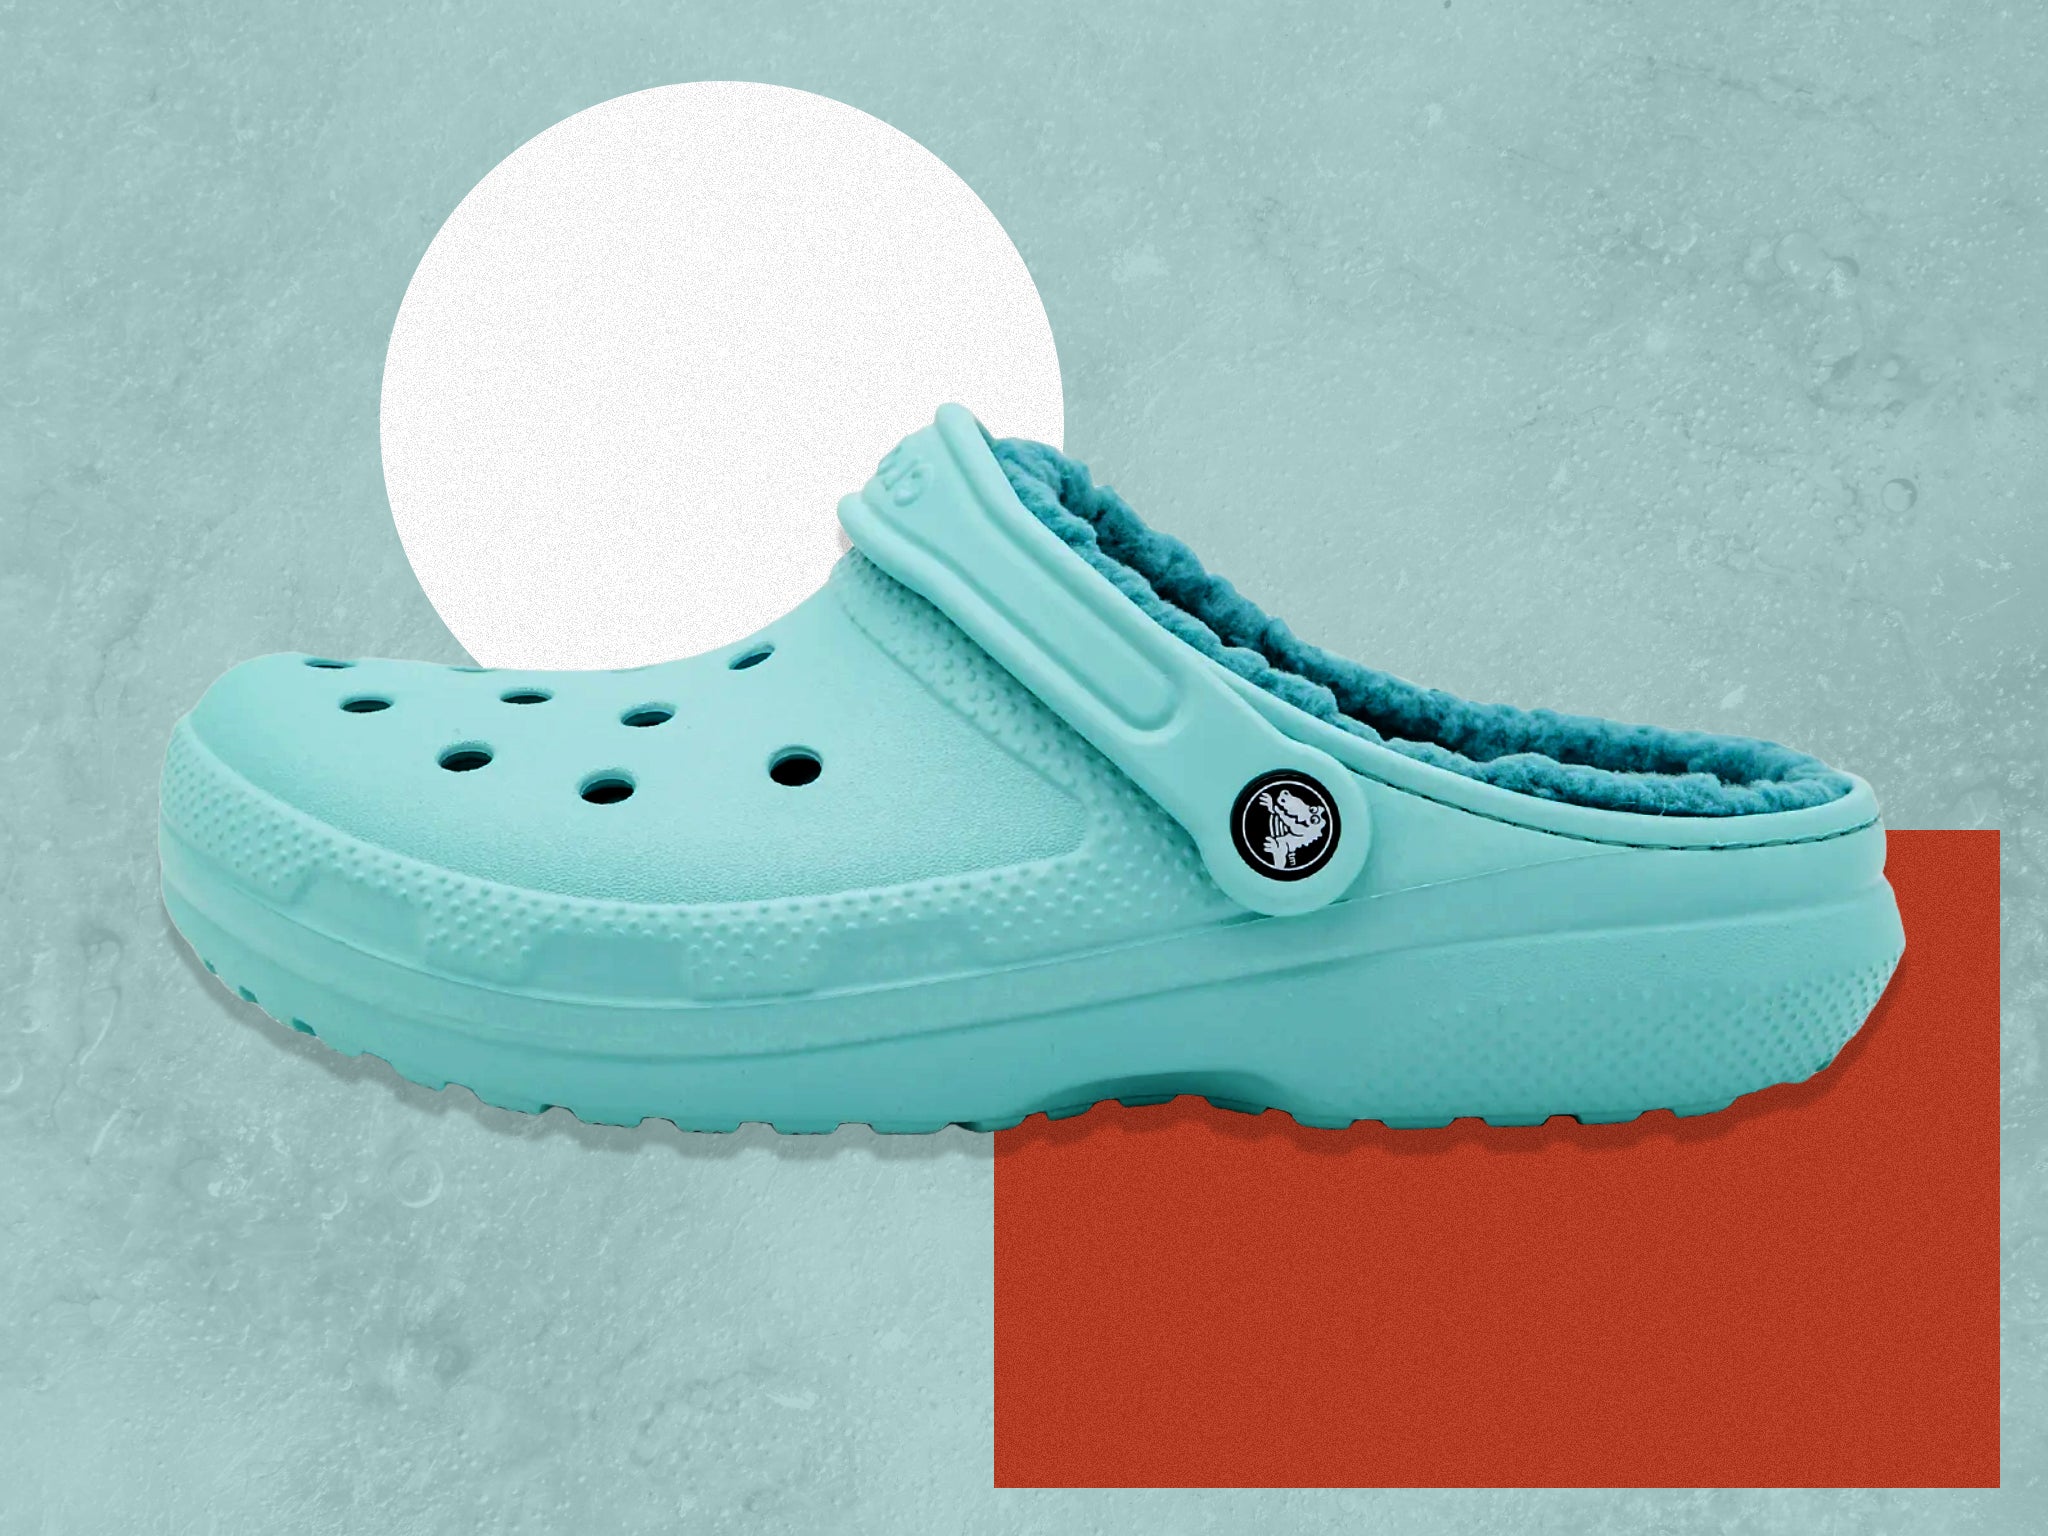 How to properly insert your Crocs Charms/Decor (My Experience